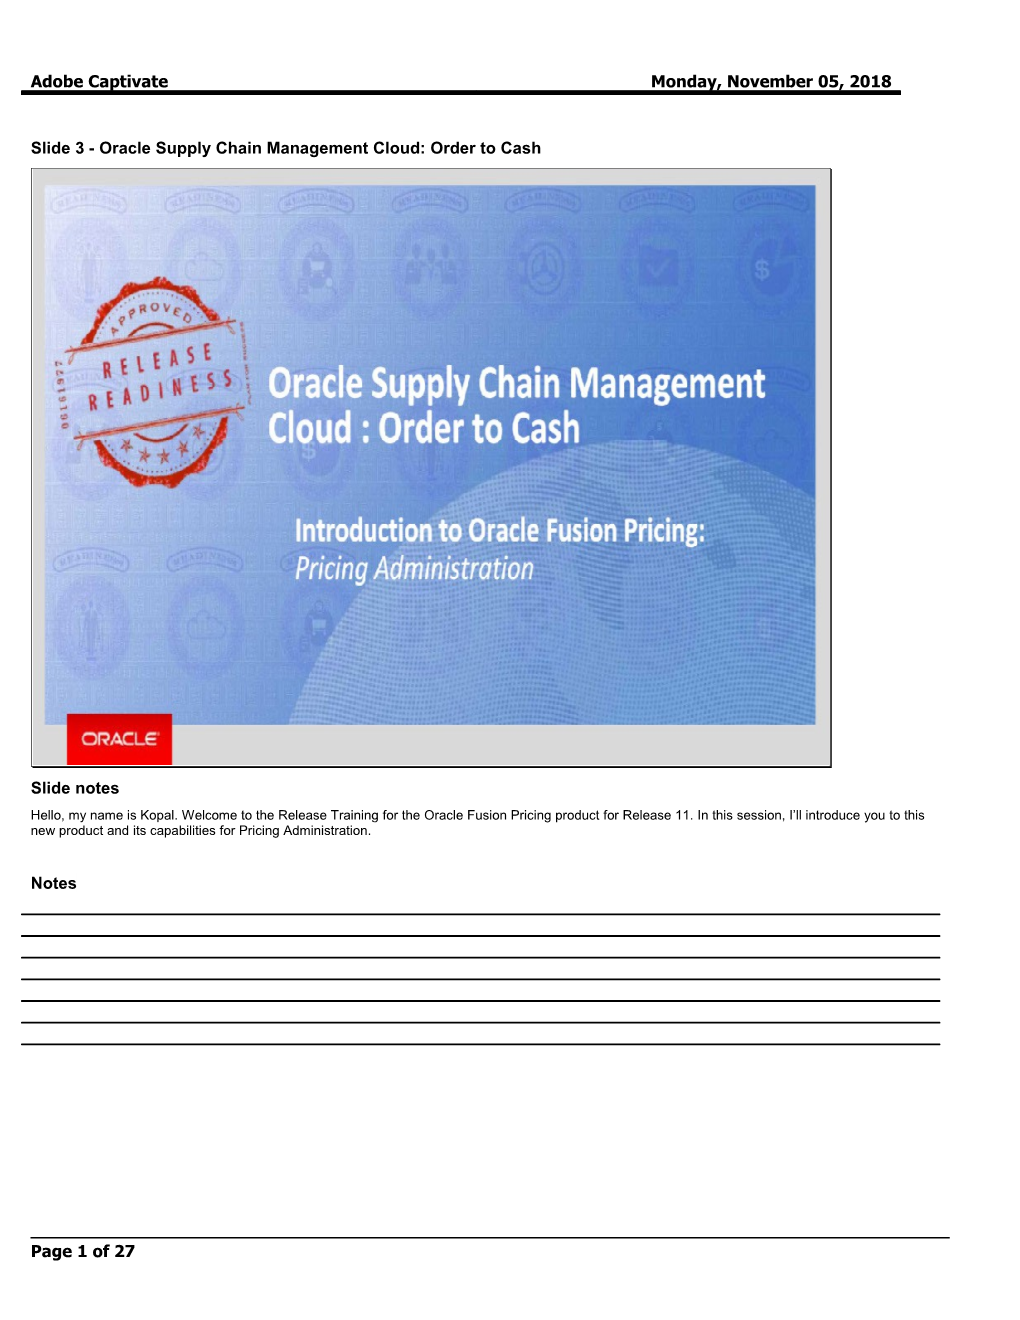 Slide 3 - Oracle Supply Chain Management Cloud: Order to Cash